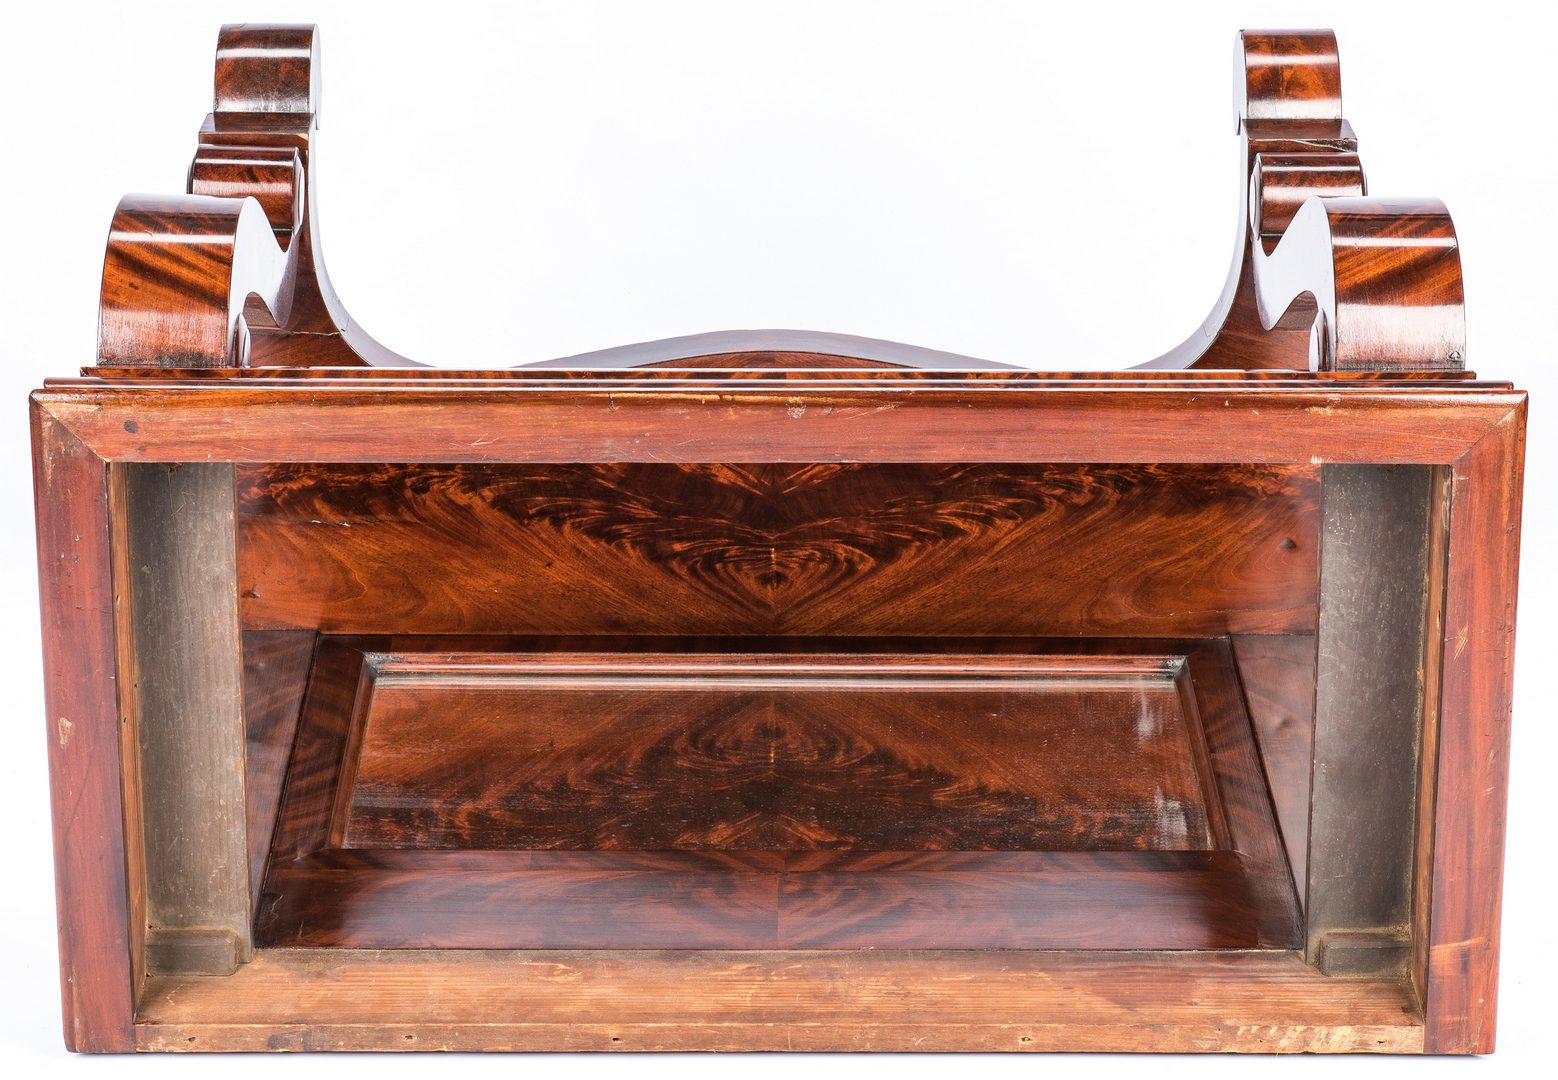 Lot 131: Signed Baltimore Marble Topped Pier Table